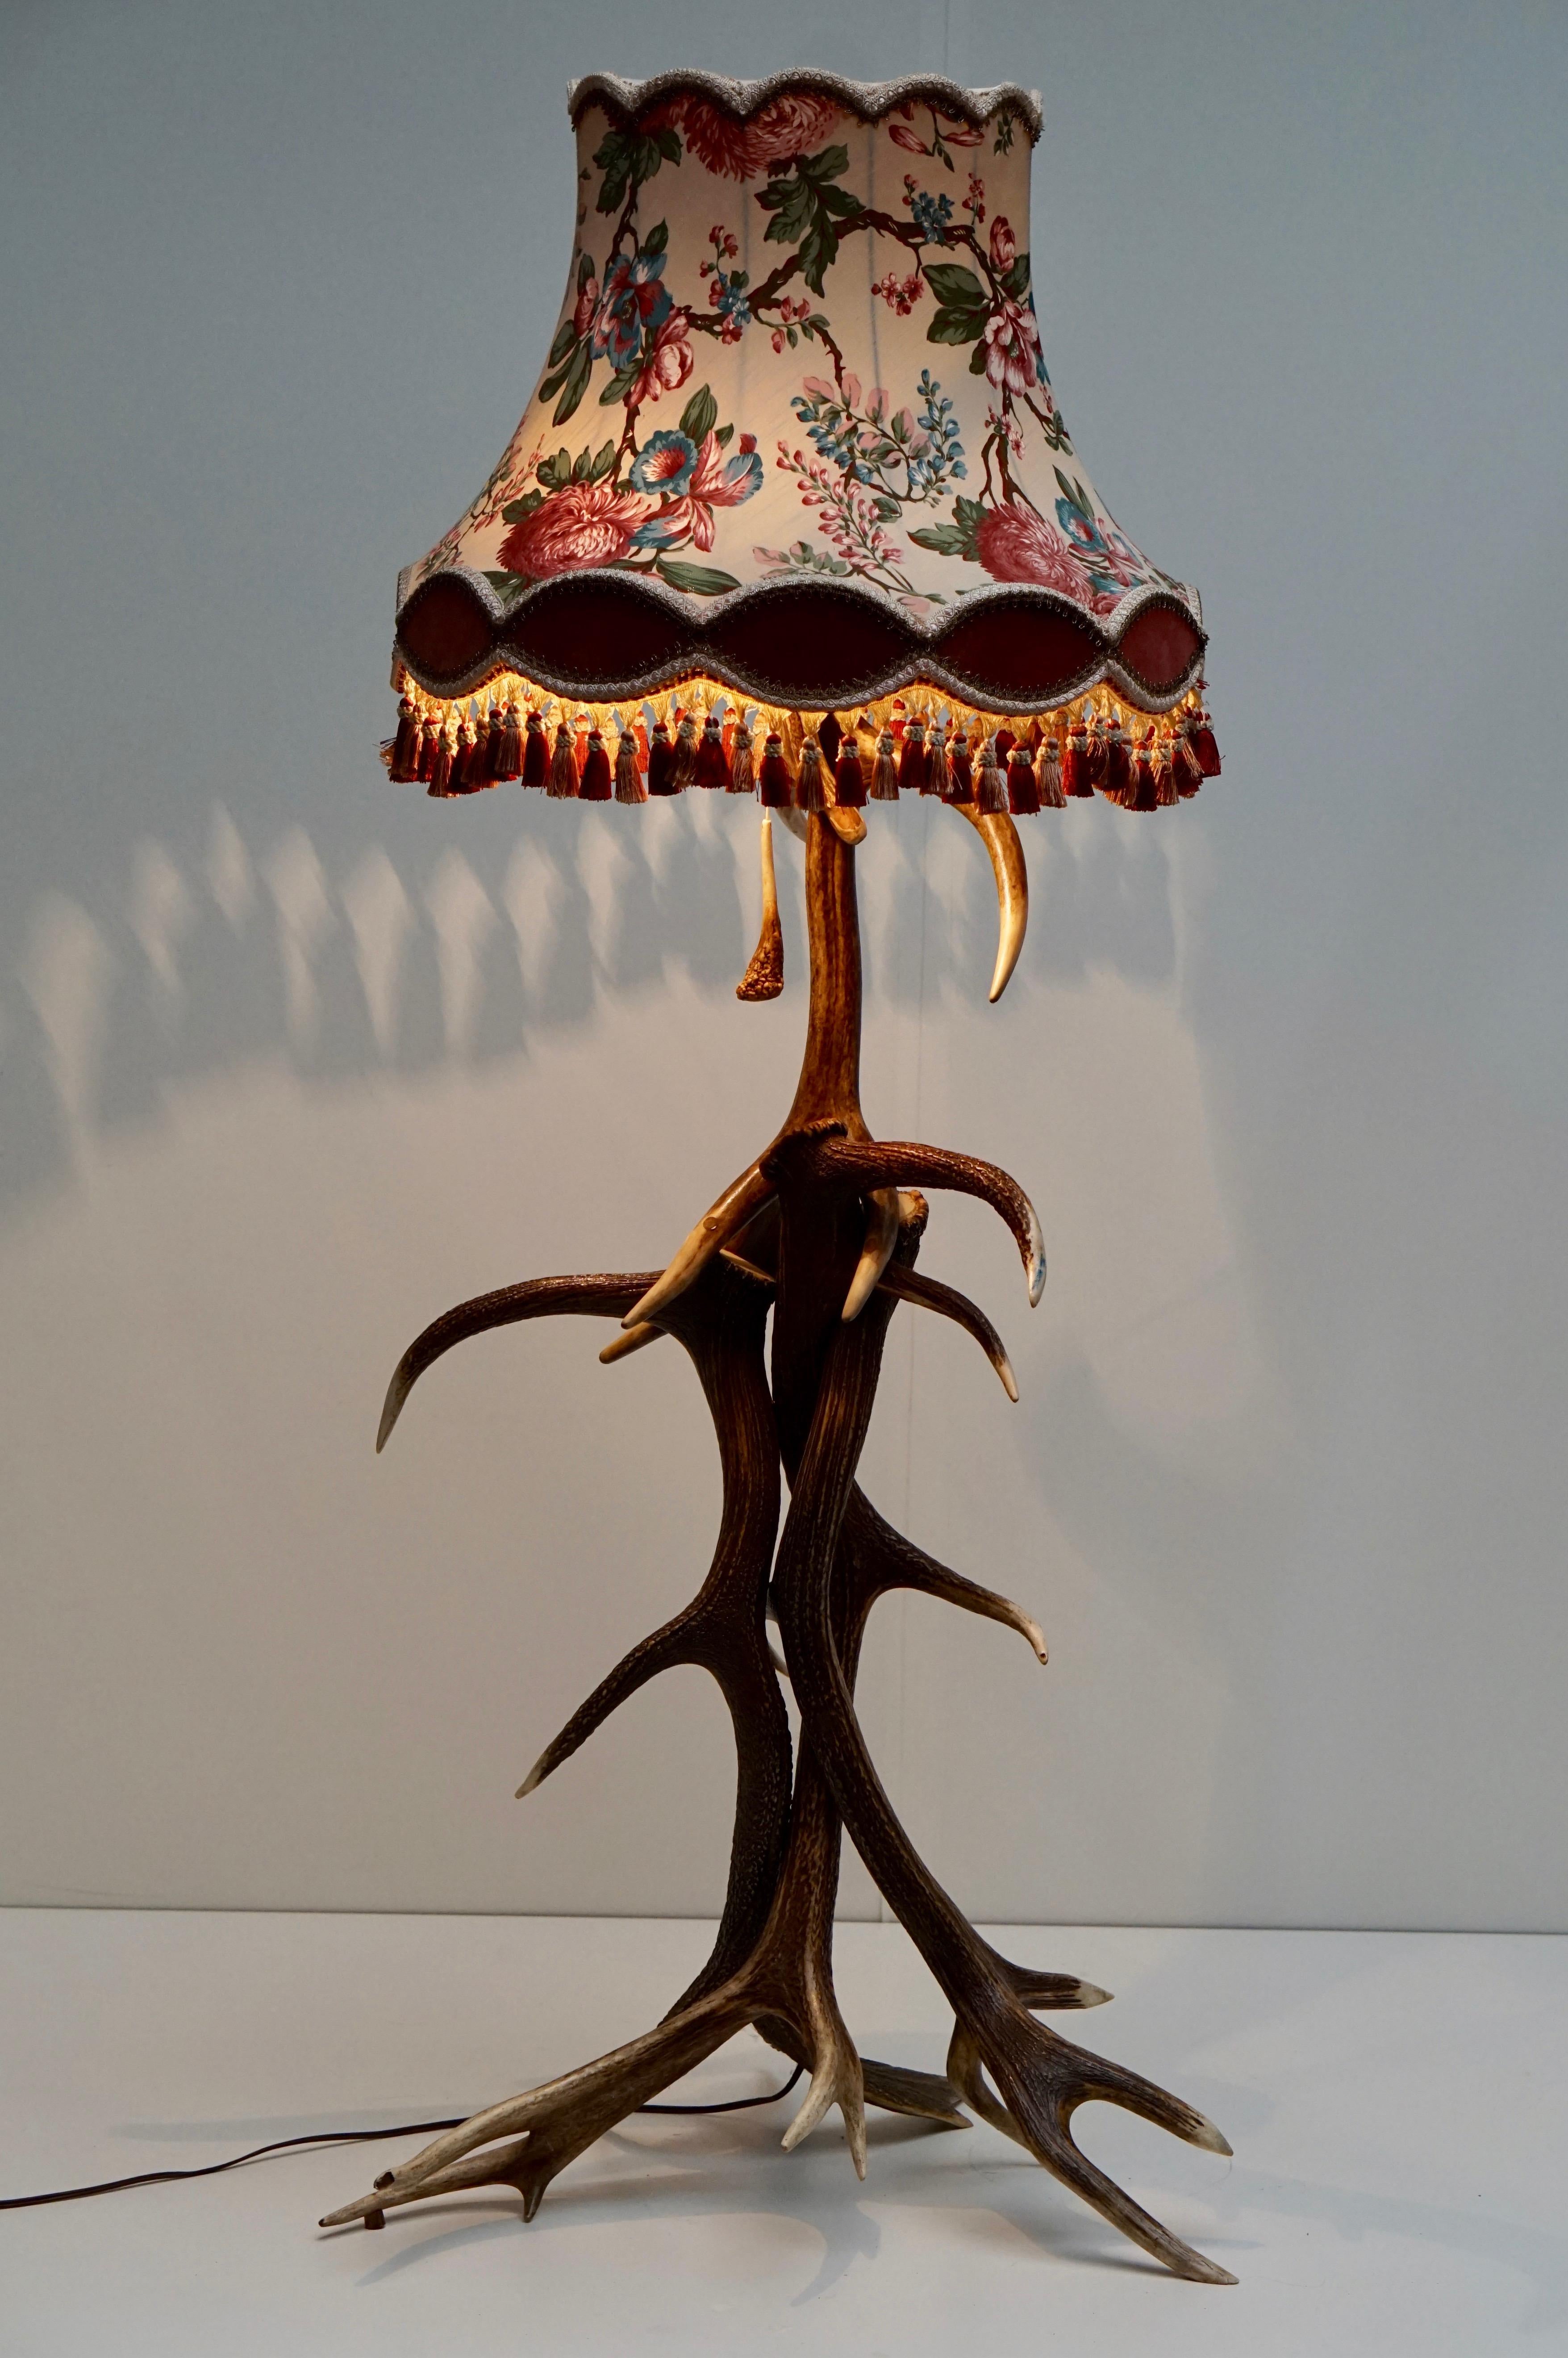 Very impressive deer antler floor lamp handmade in 1950s in Austria. The lamp is made of discarded deer antler. 
The very beautiful original 1950s shade color is Bordeaux and decorated with flowers. 
The lamp is in excellent condition. Fully